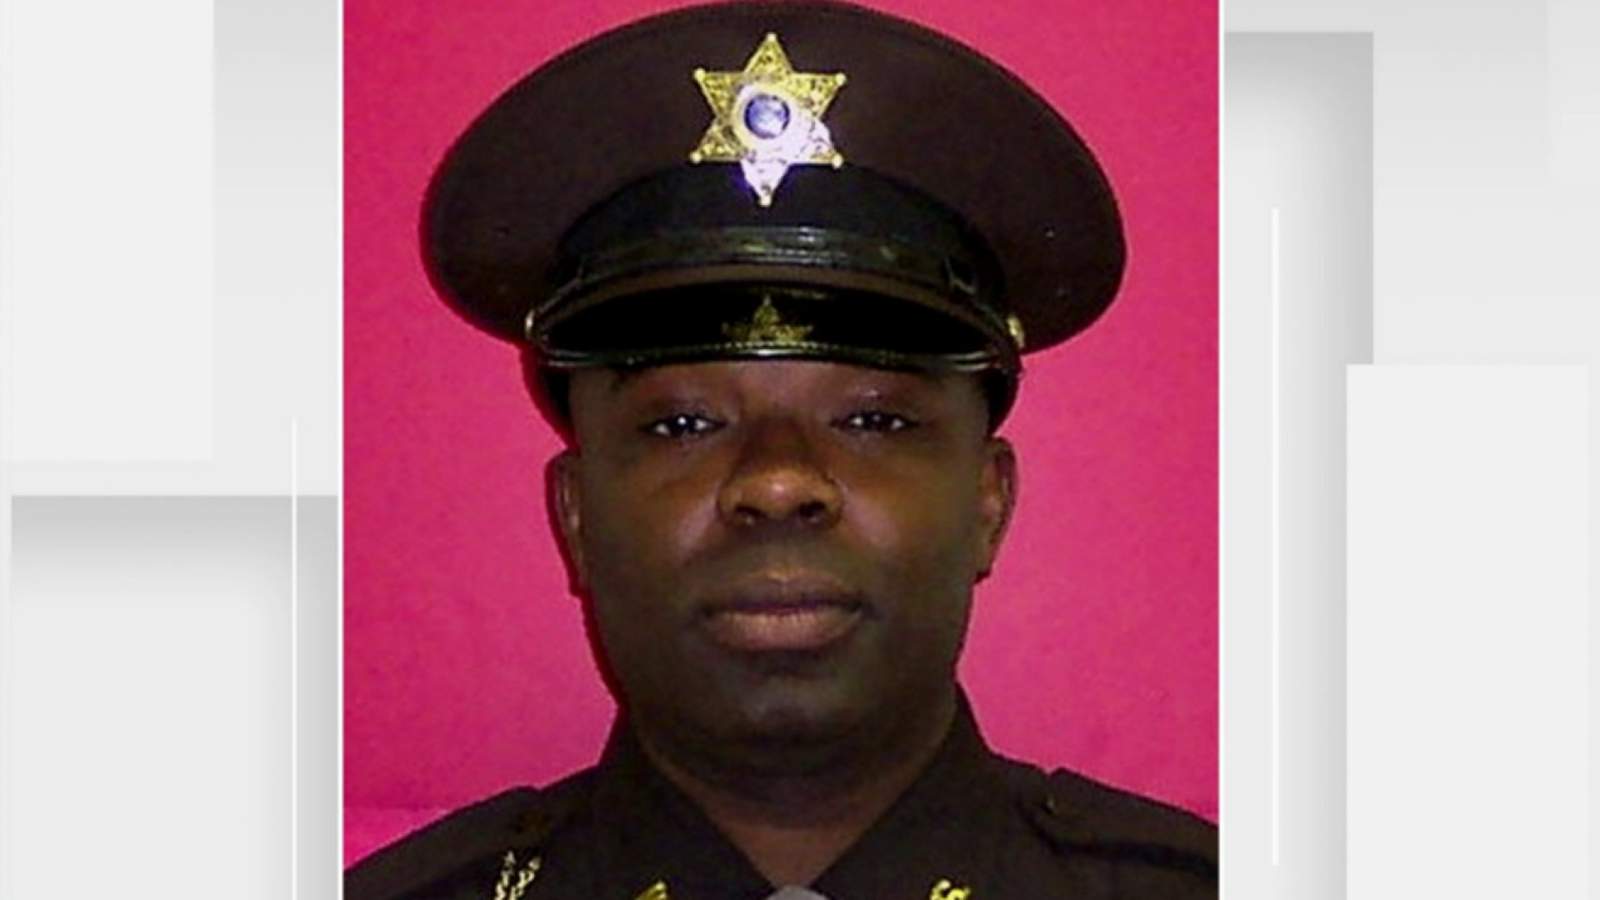 Wayne County Sheriff’s corporal dies after attack inside jail